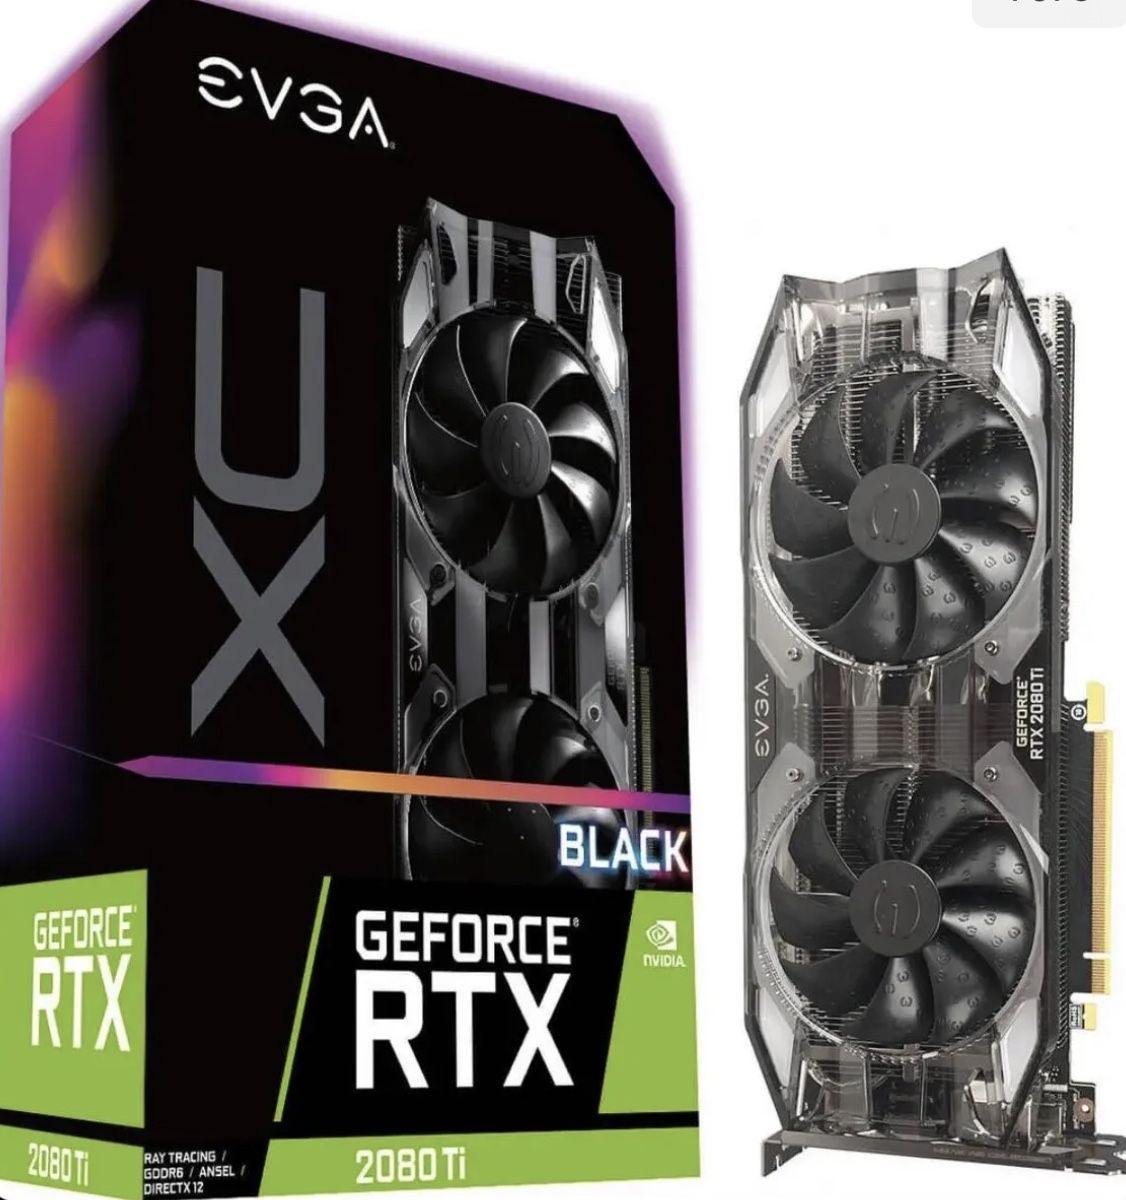 EVGA GeForce RTX 2080 Ti Black Edition Gaming 11GB GDDR6 Graphics Card for Sale in New York, NY OfferUp